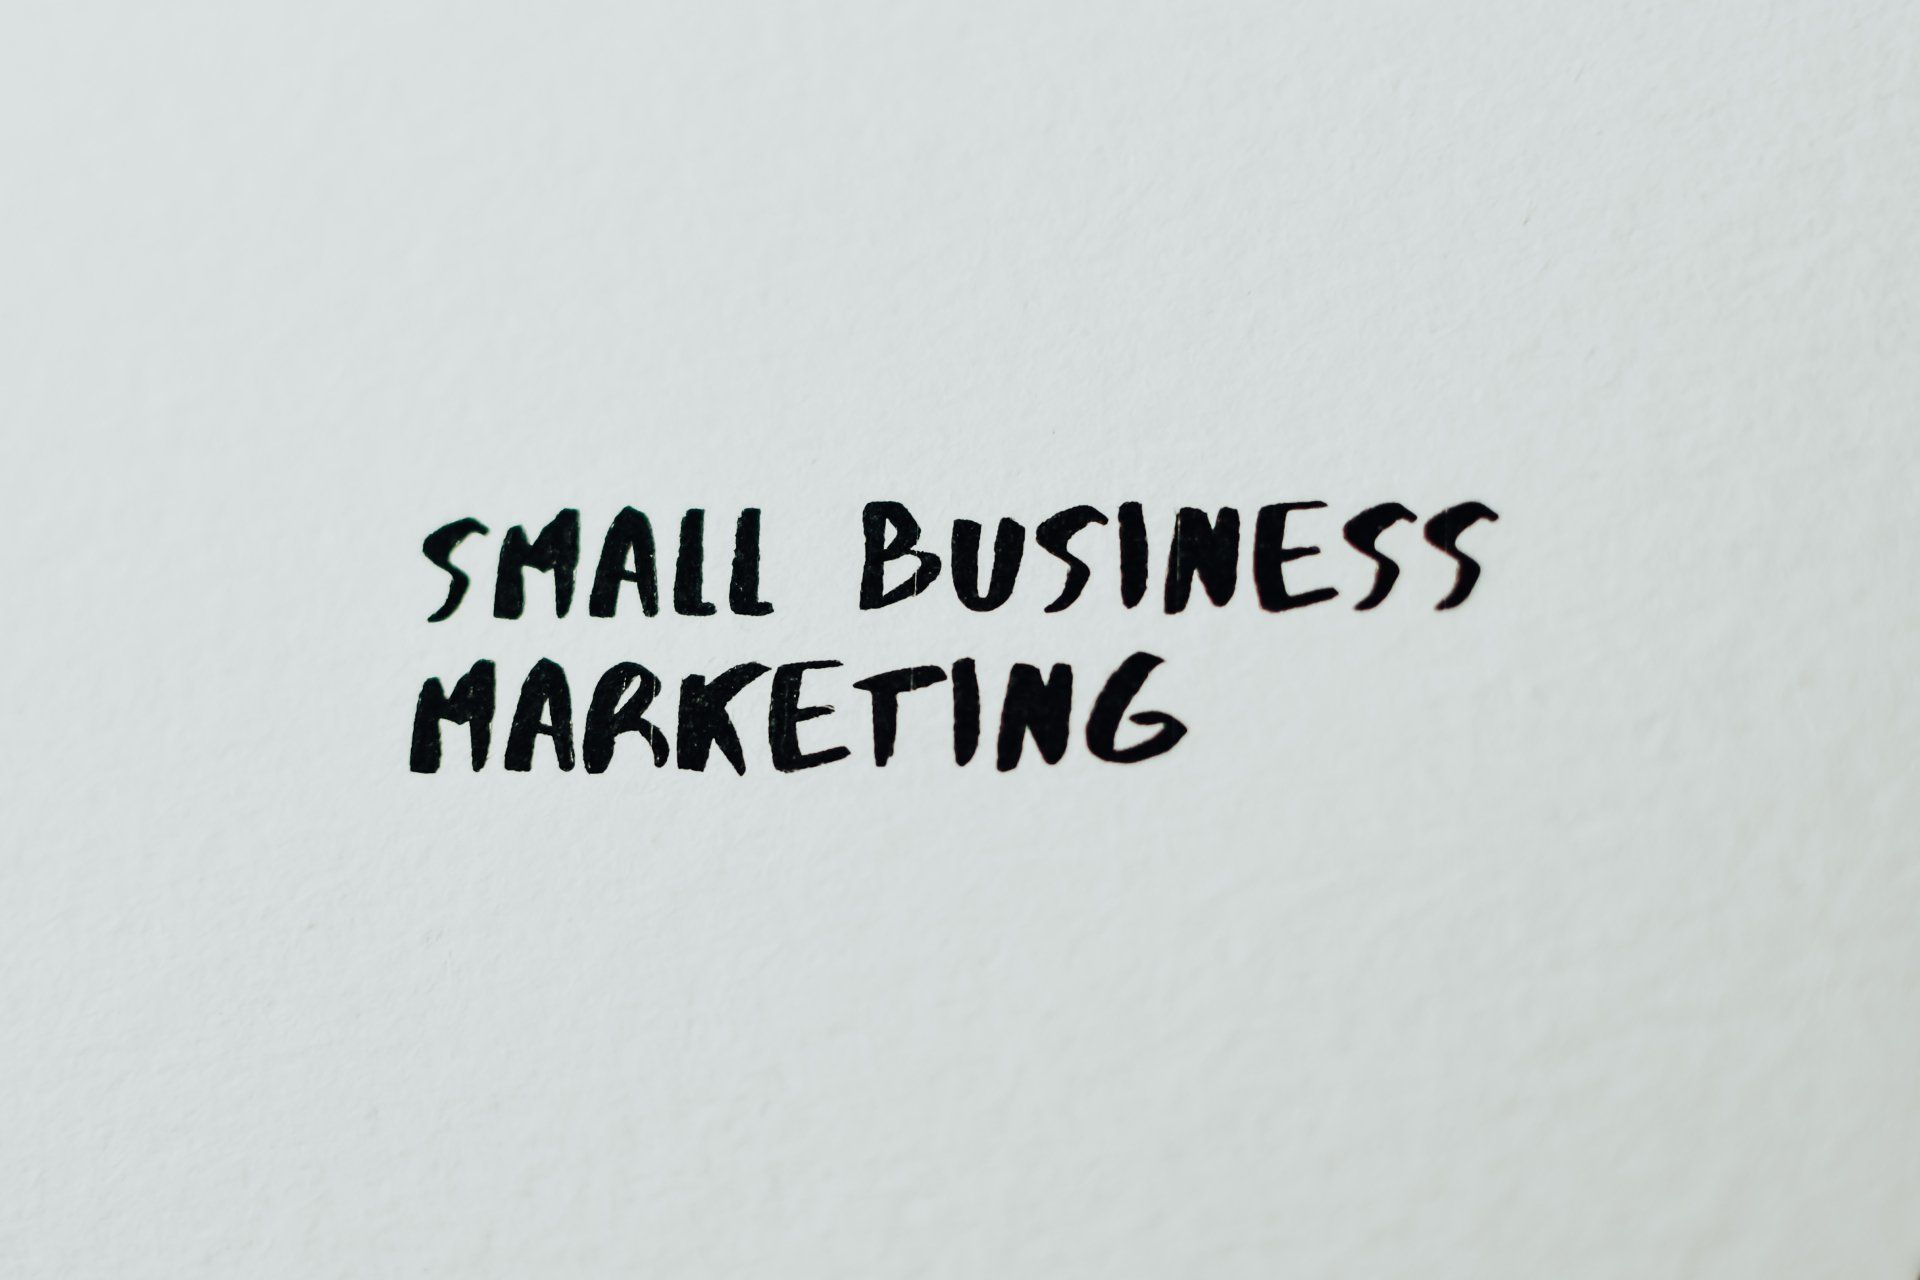 Image of text small business marketing